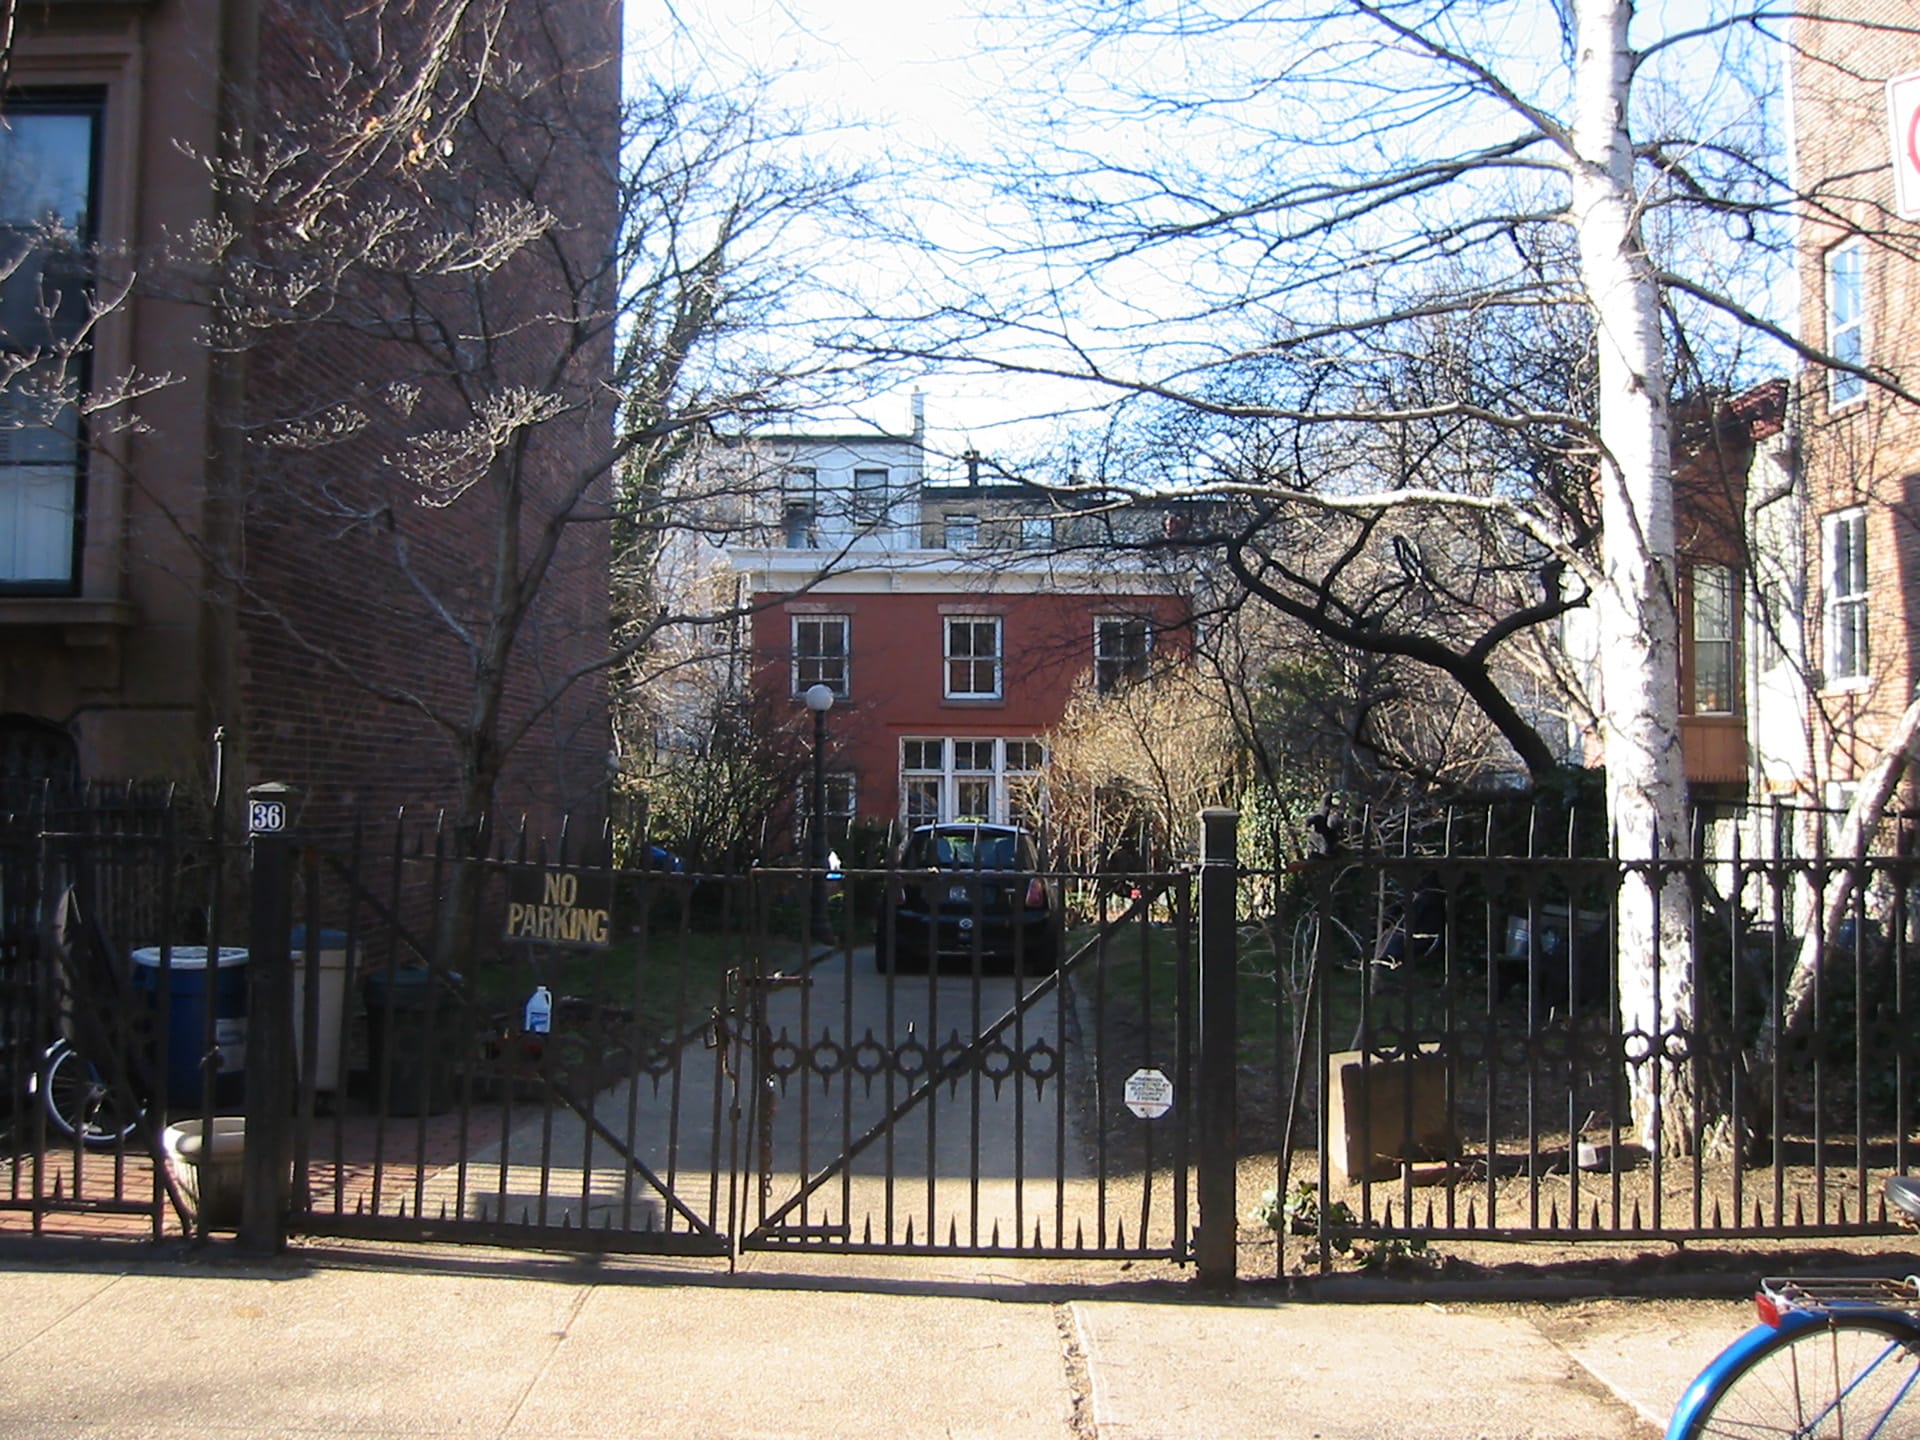 Street view of a rear-situated Cobble Hill carriage house with a front driveway, gate, and white trim.